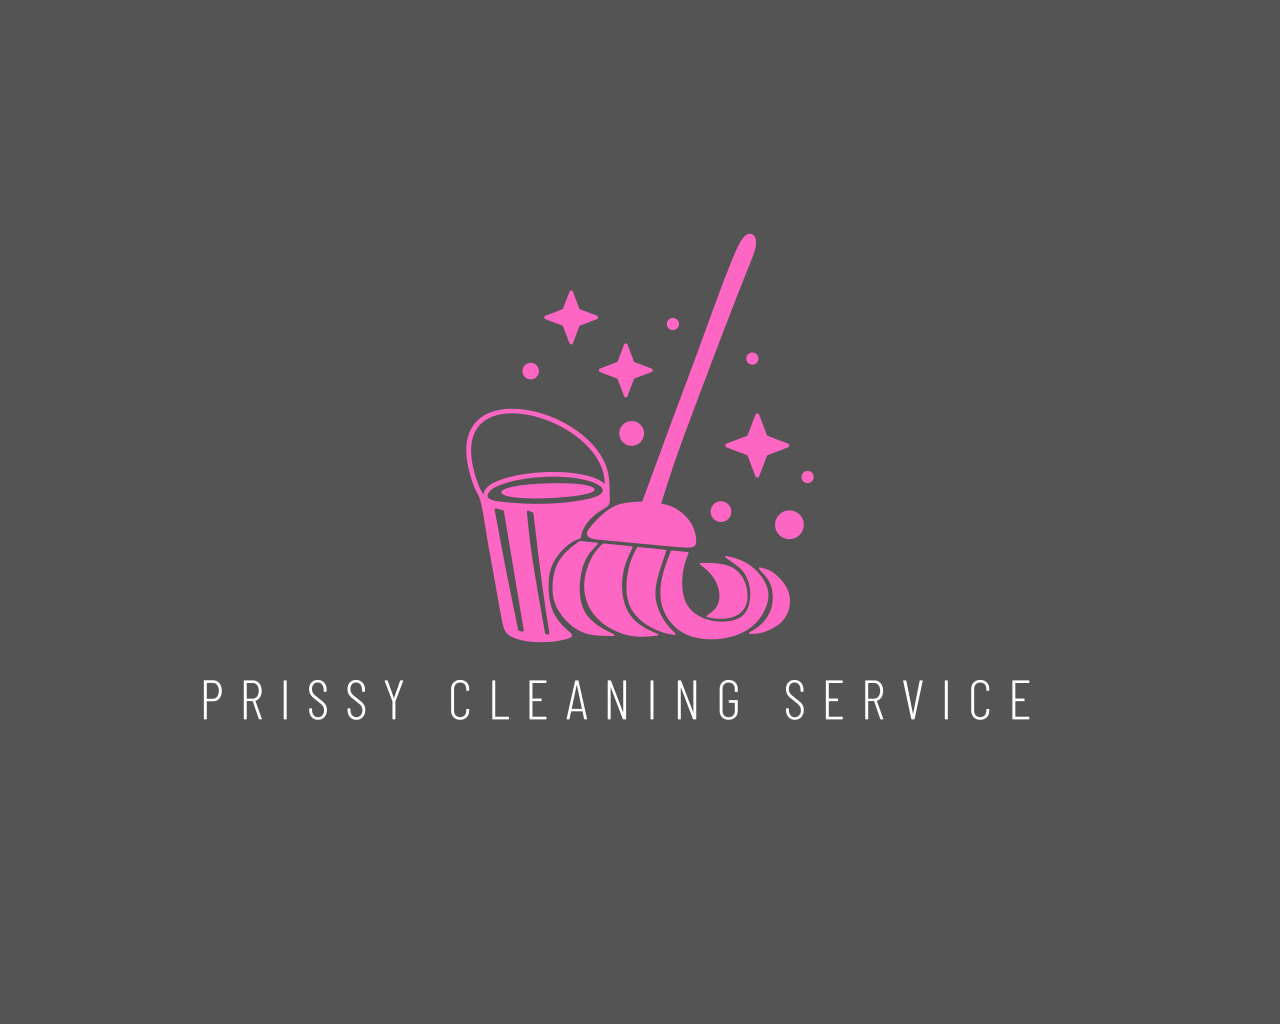 Prissy Cleaning Service 's web page